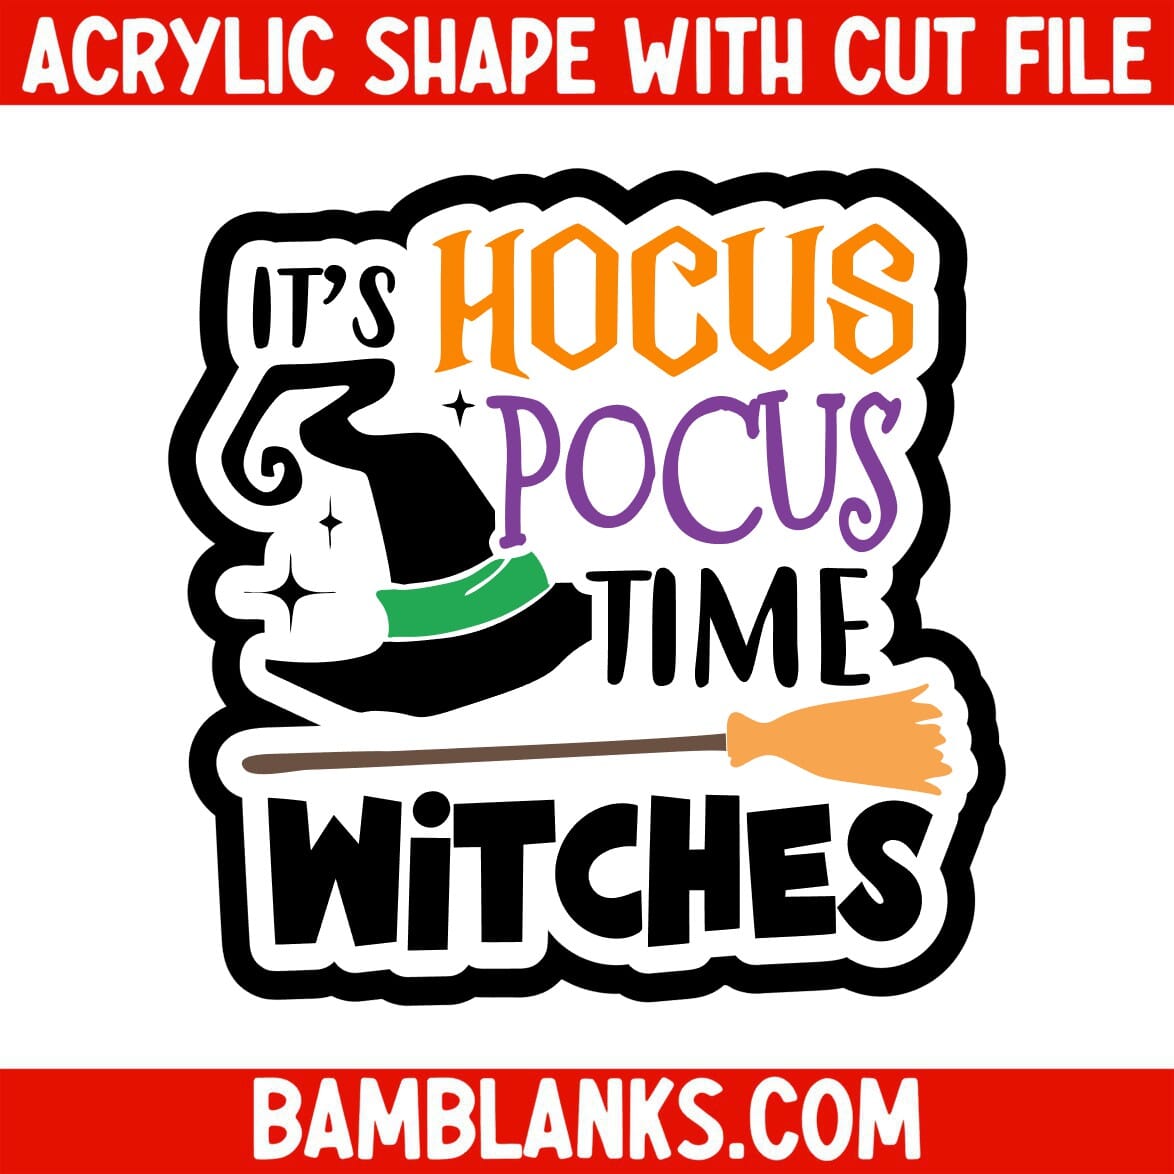 Its Hocus Pocus Time Witches - Acrylic Shape #2203